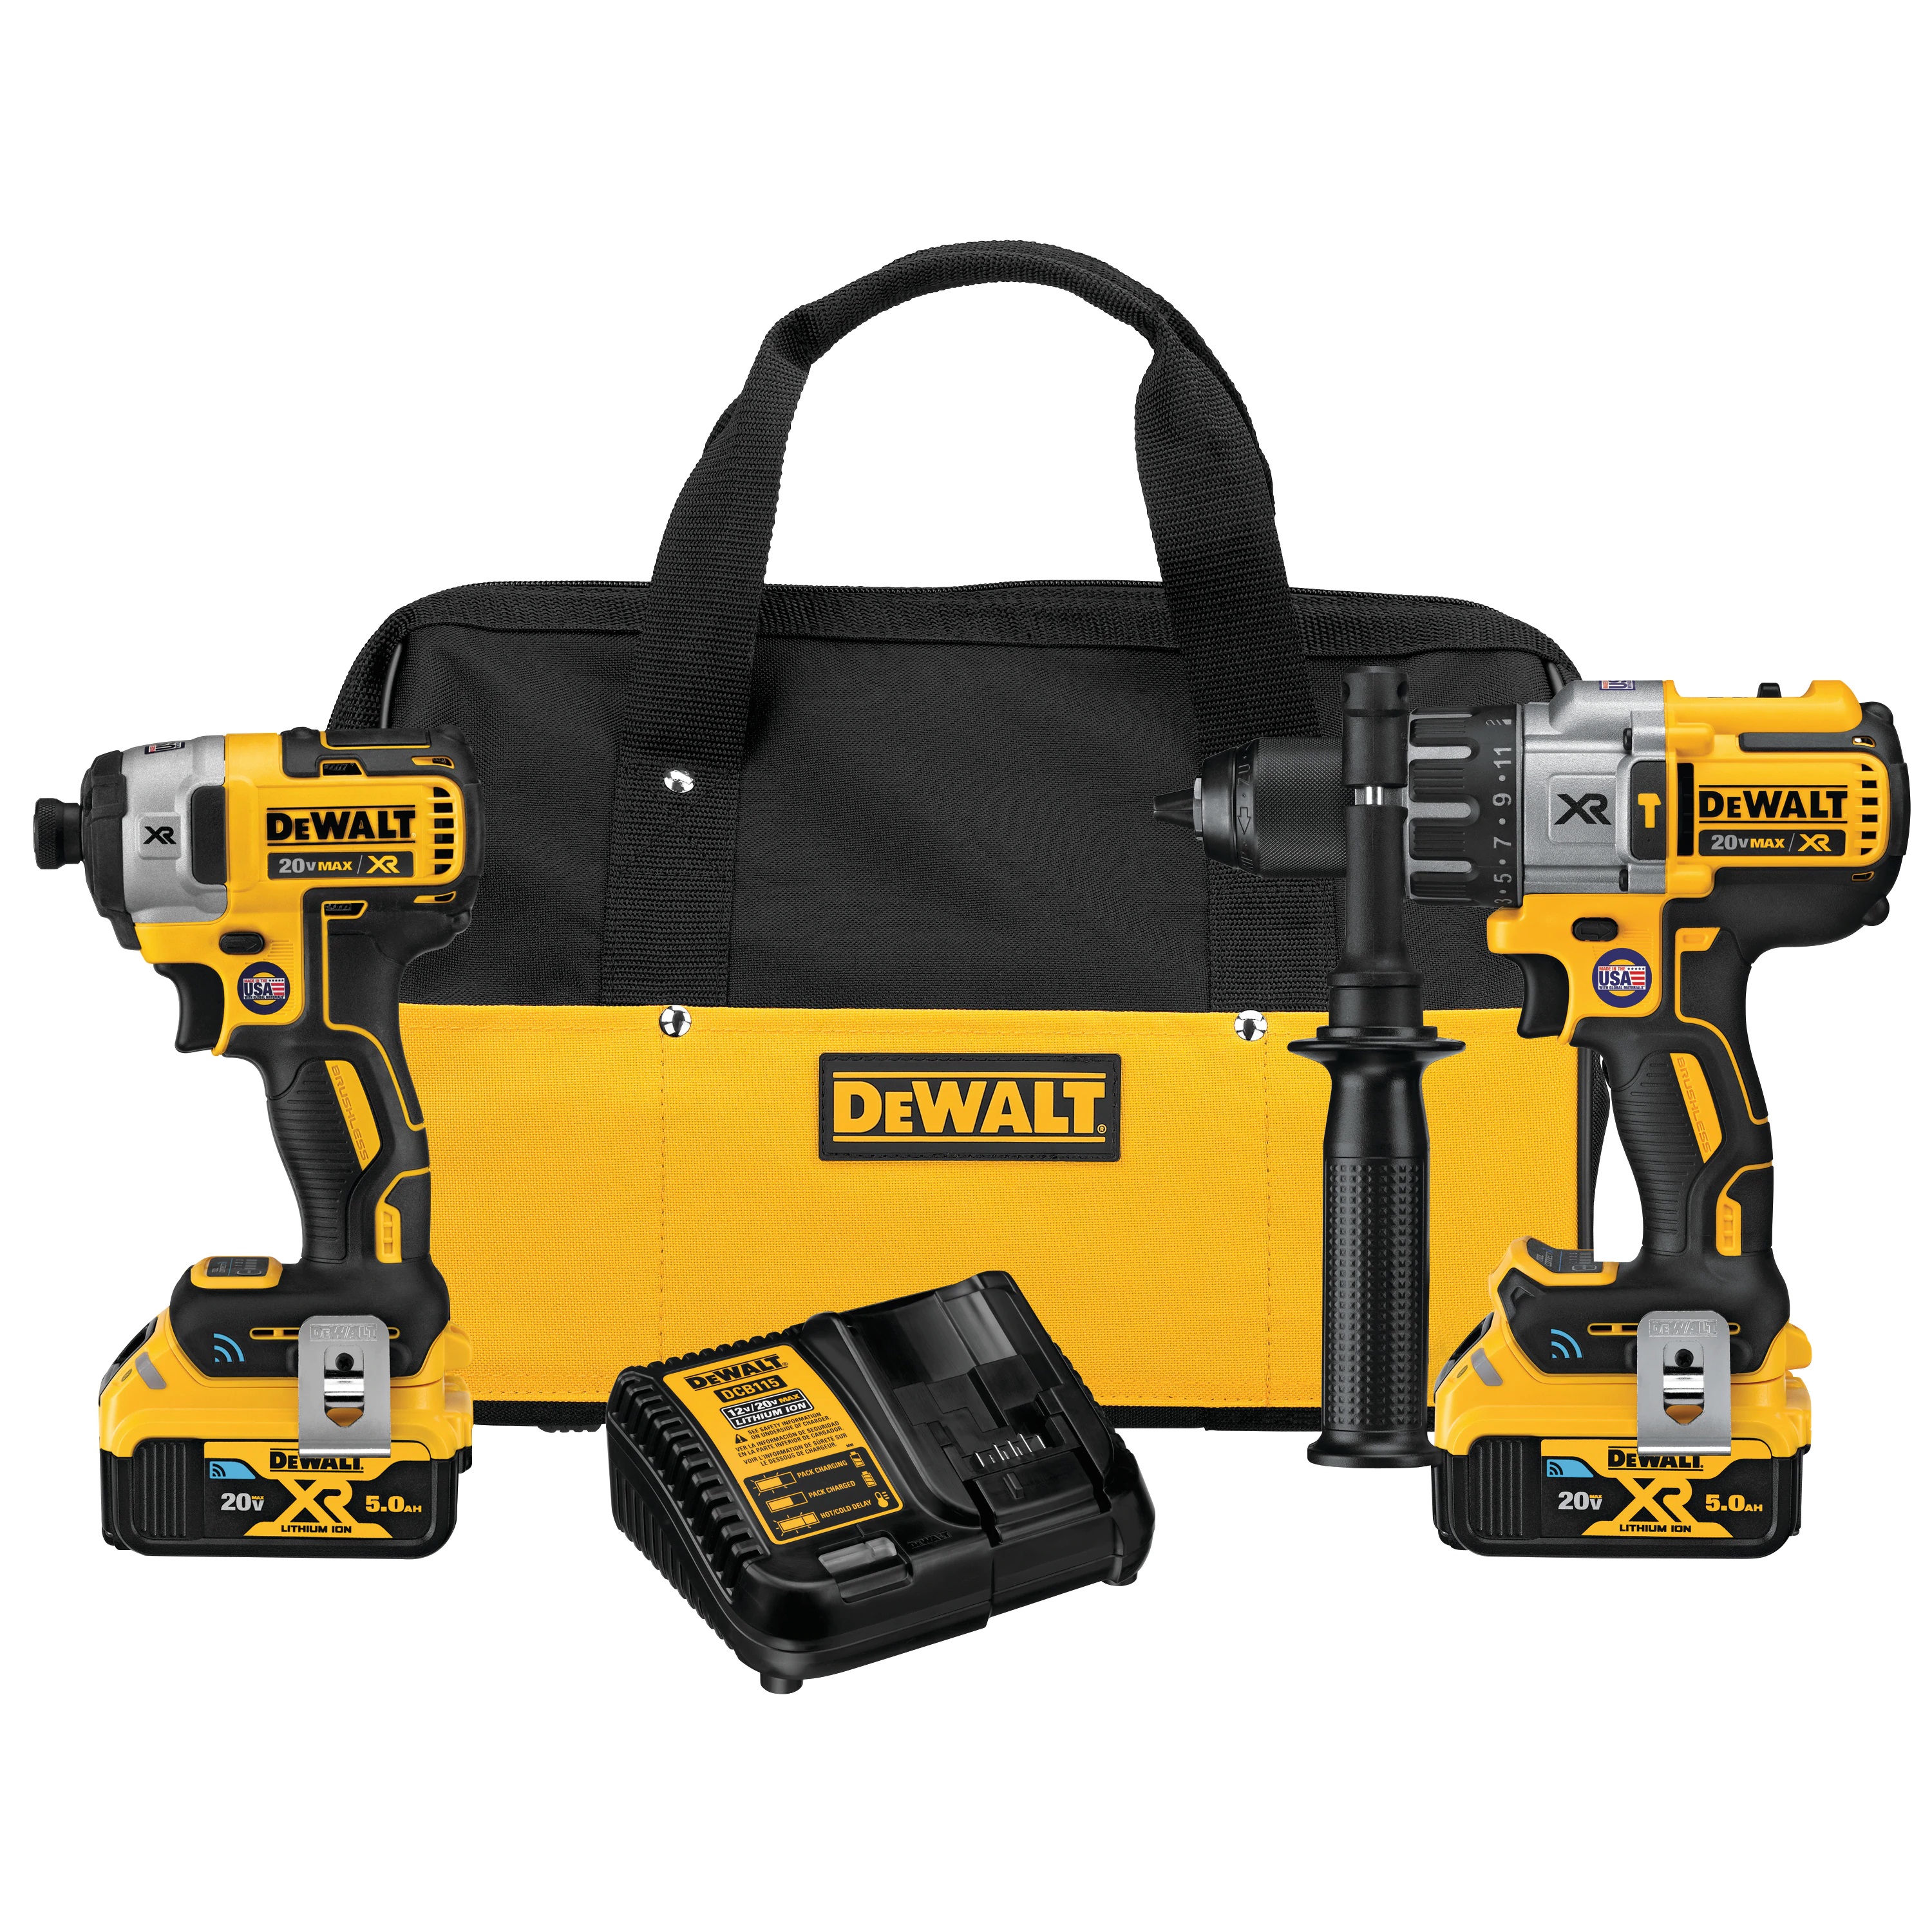 TOOL CONNECT™ 20V MAX* 2-TOOL COMBO KIT WITH BLUETOOTH® BATTERIES - Power Tools